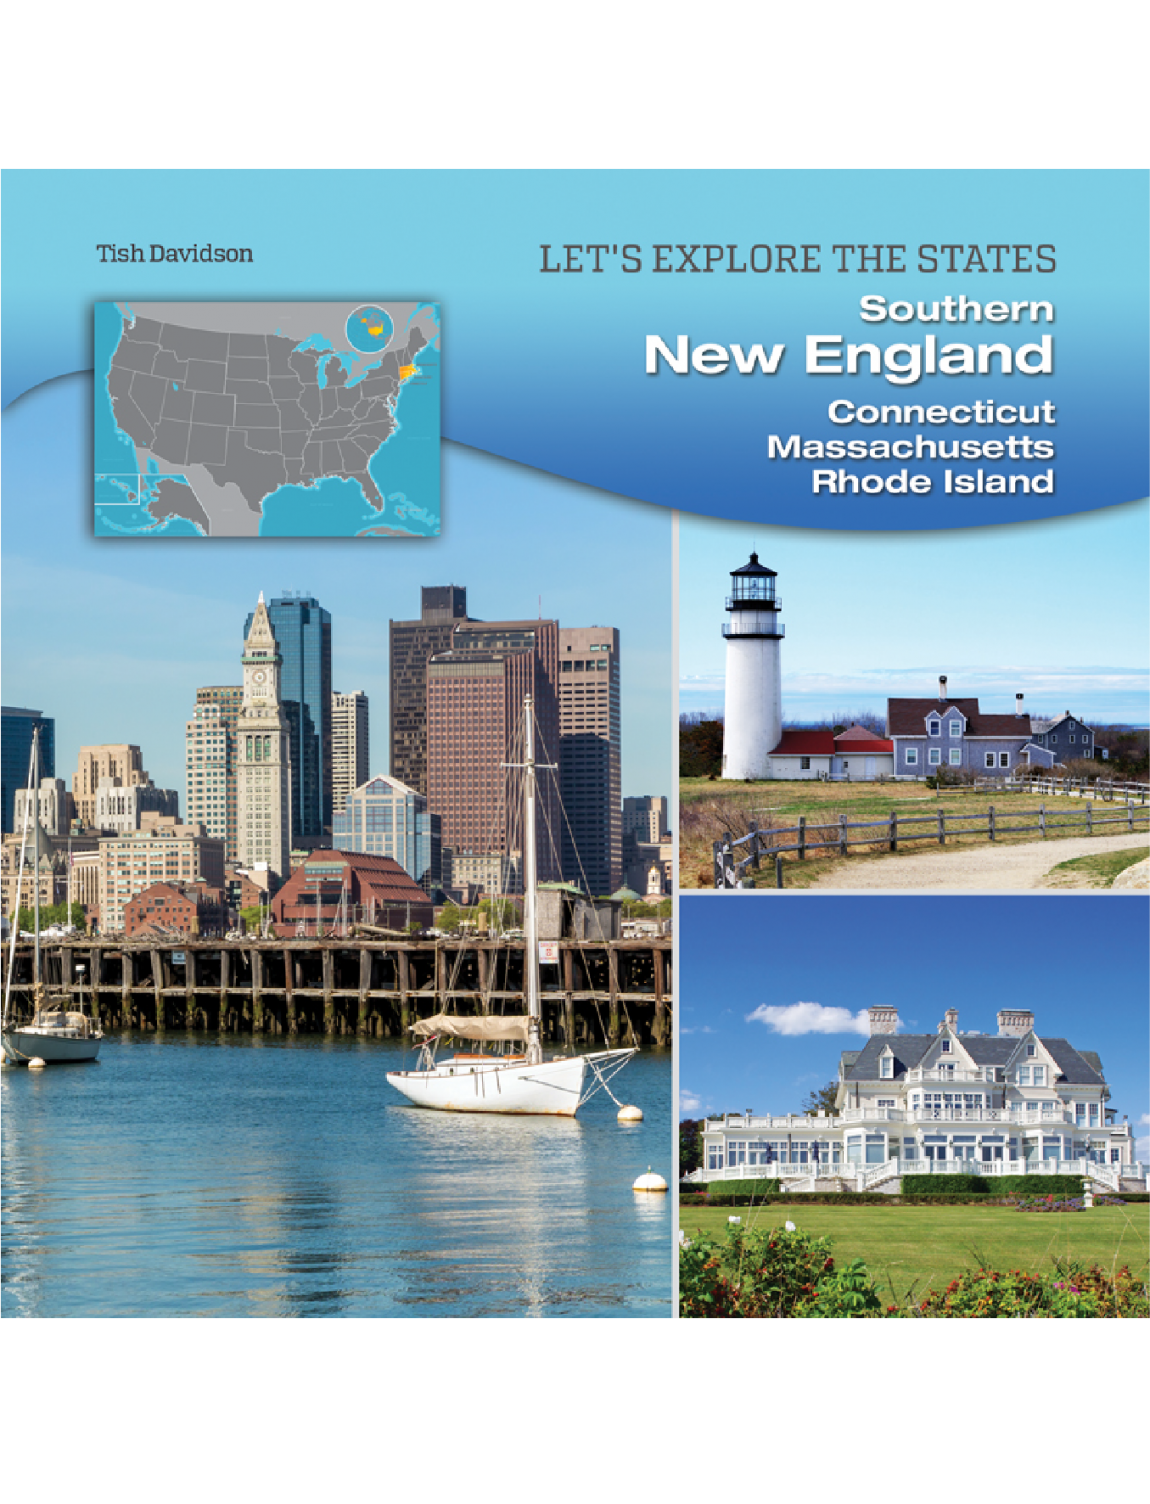 southern-new-england-01.png